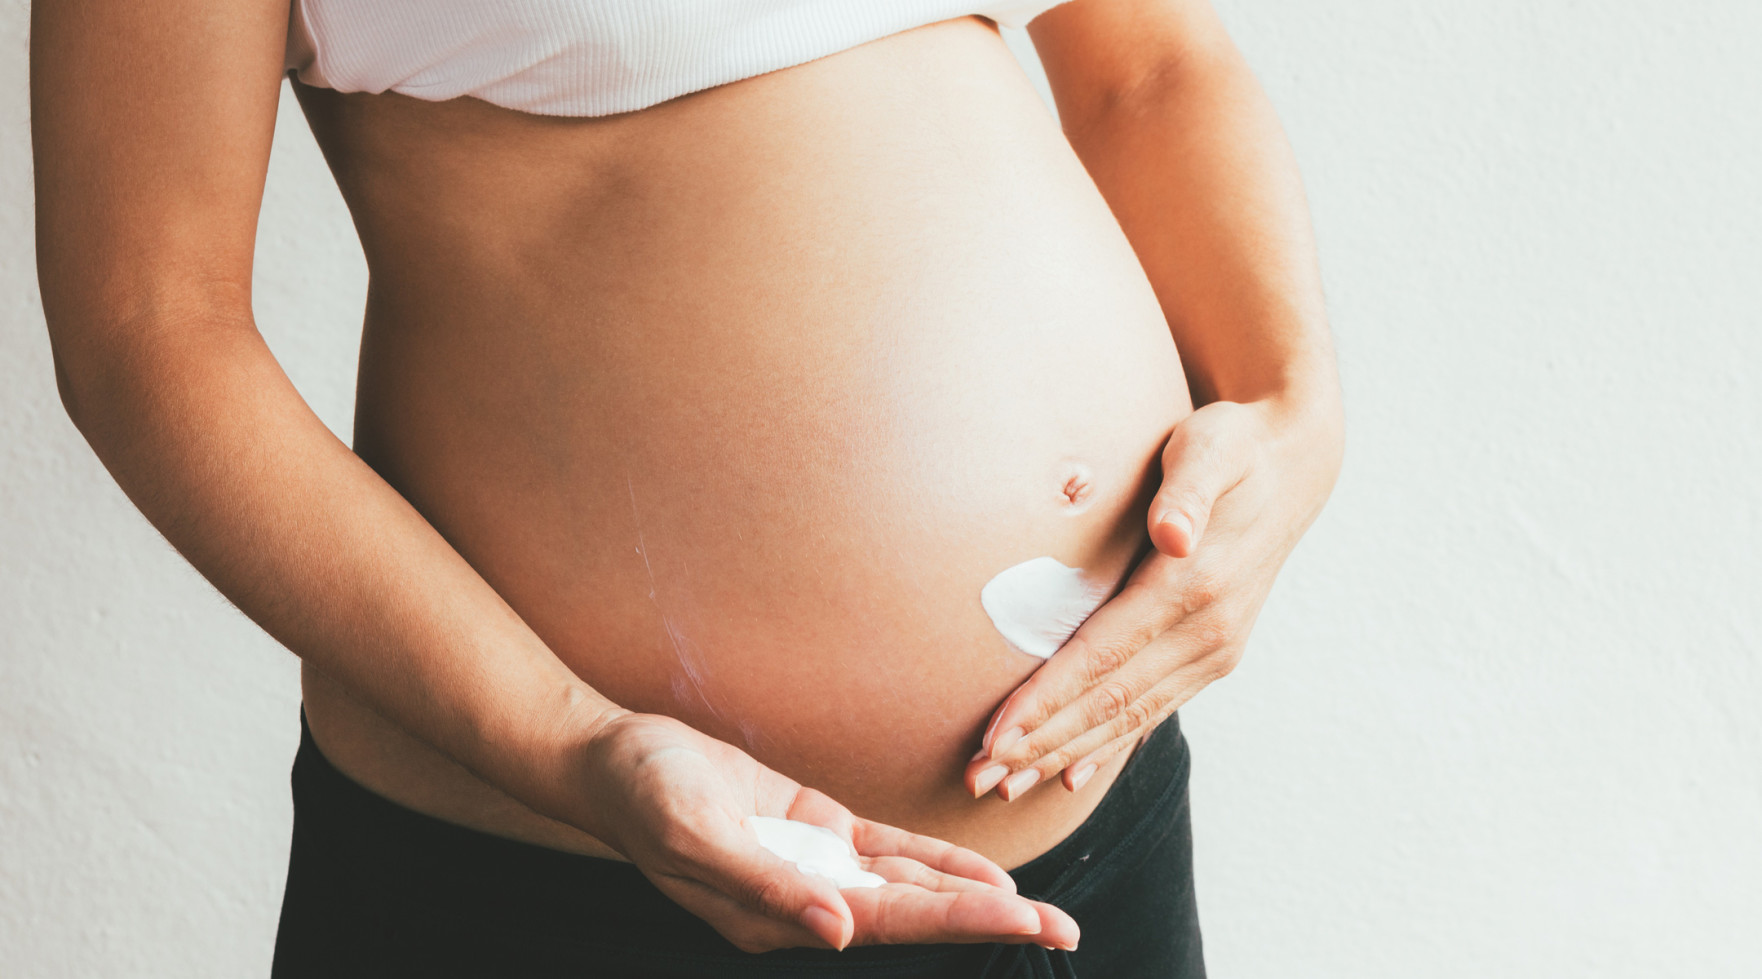 Heat Rash During Pregnancy: Causes, Symptoms and Prevention